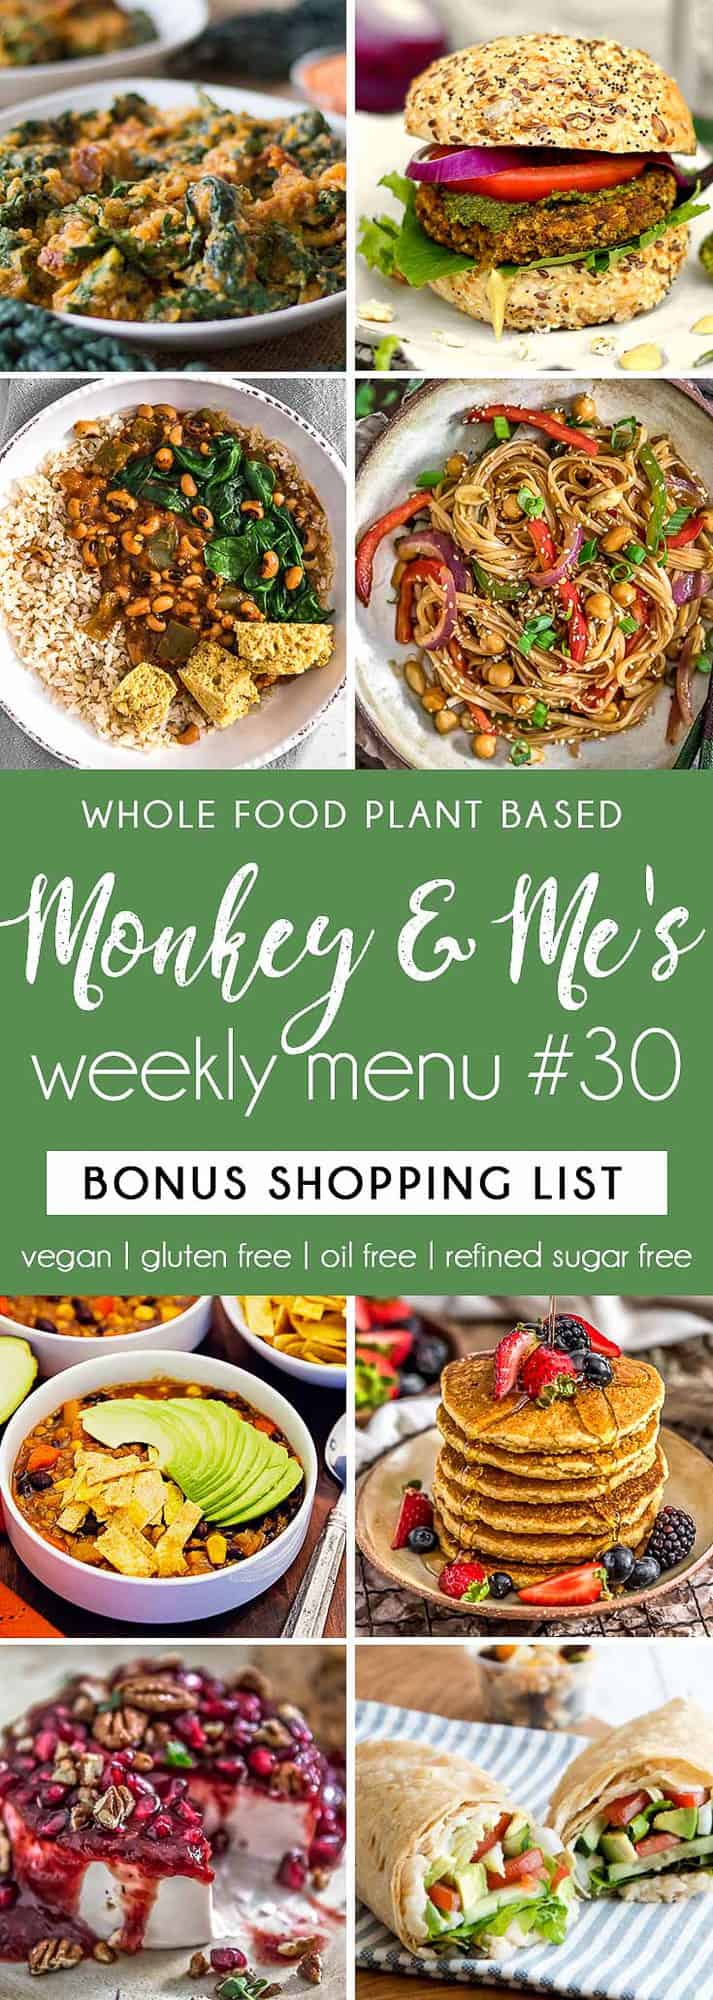 Monkey and Me's Menu 30 featuring 8 recipes